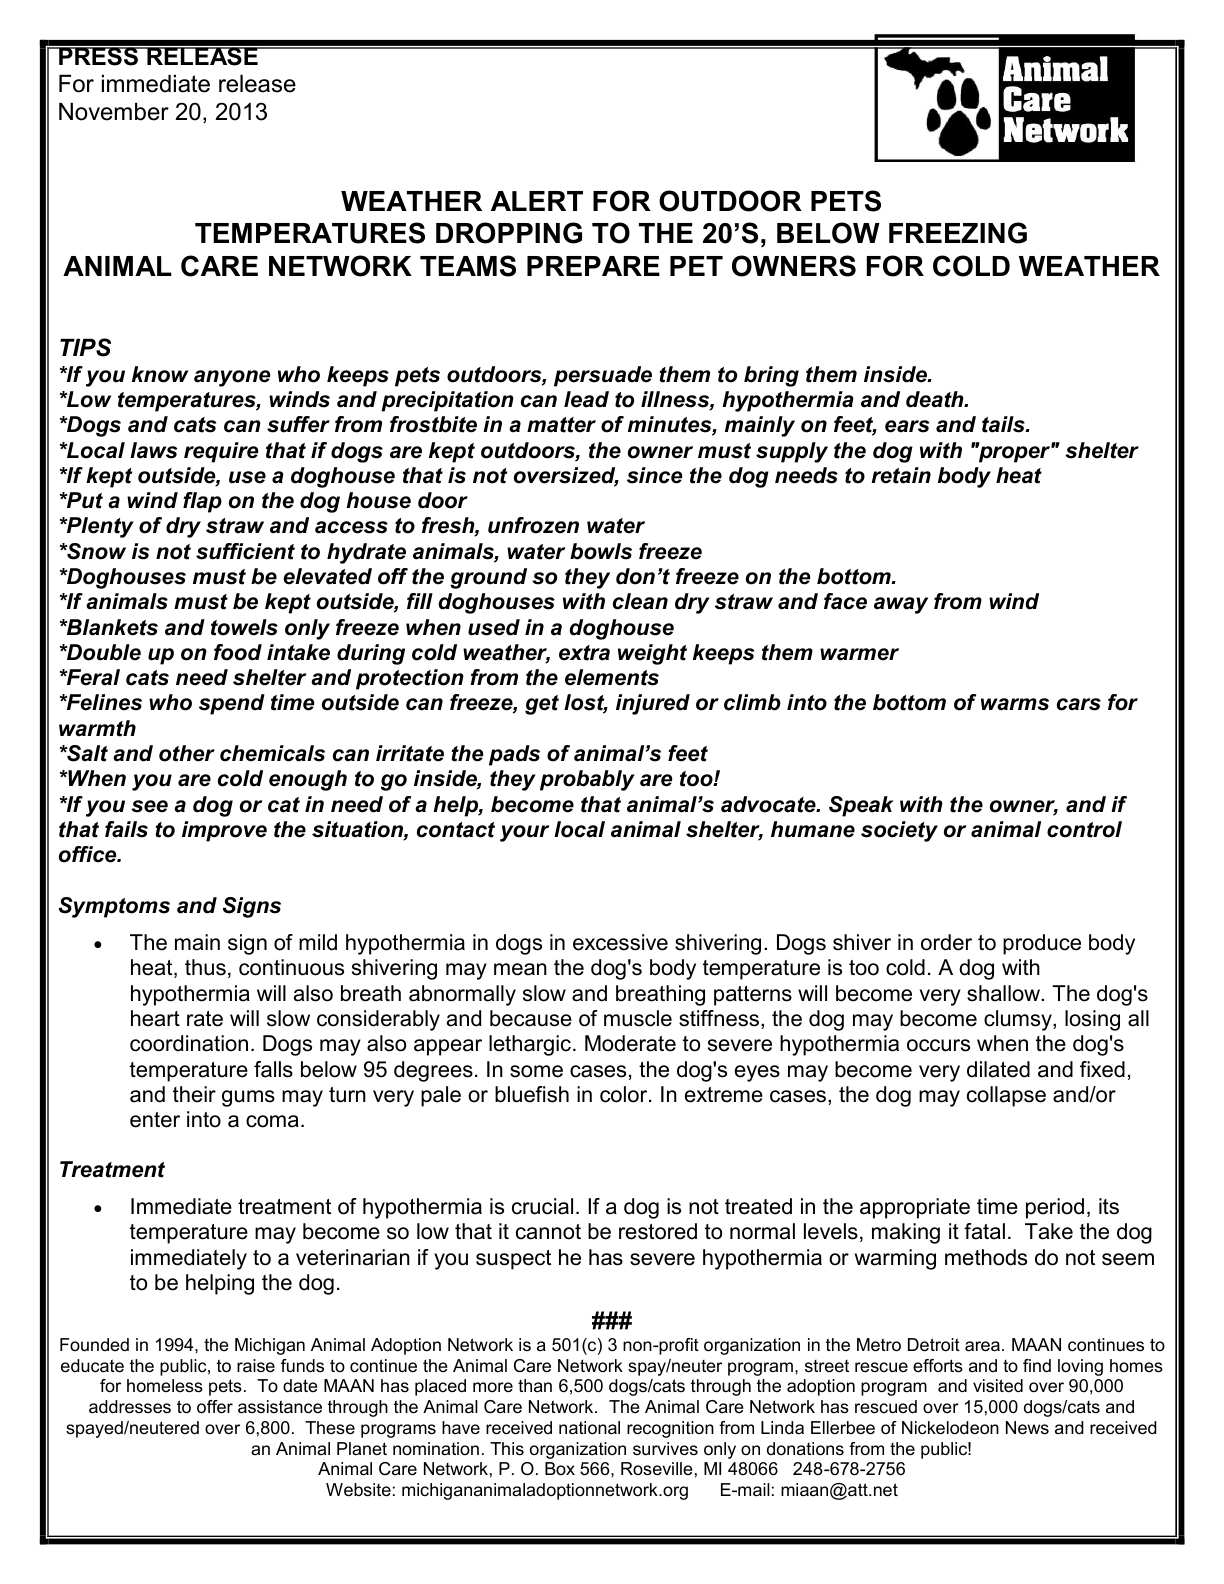 PRESS RELEASE COLD WEATHER ANIMAL CARE NETWORK 11-2013